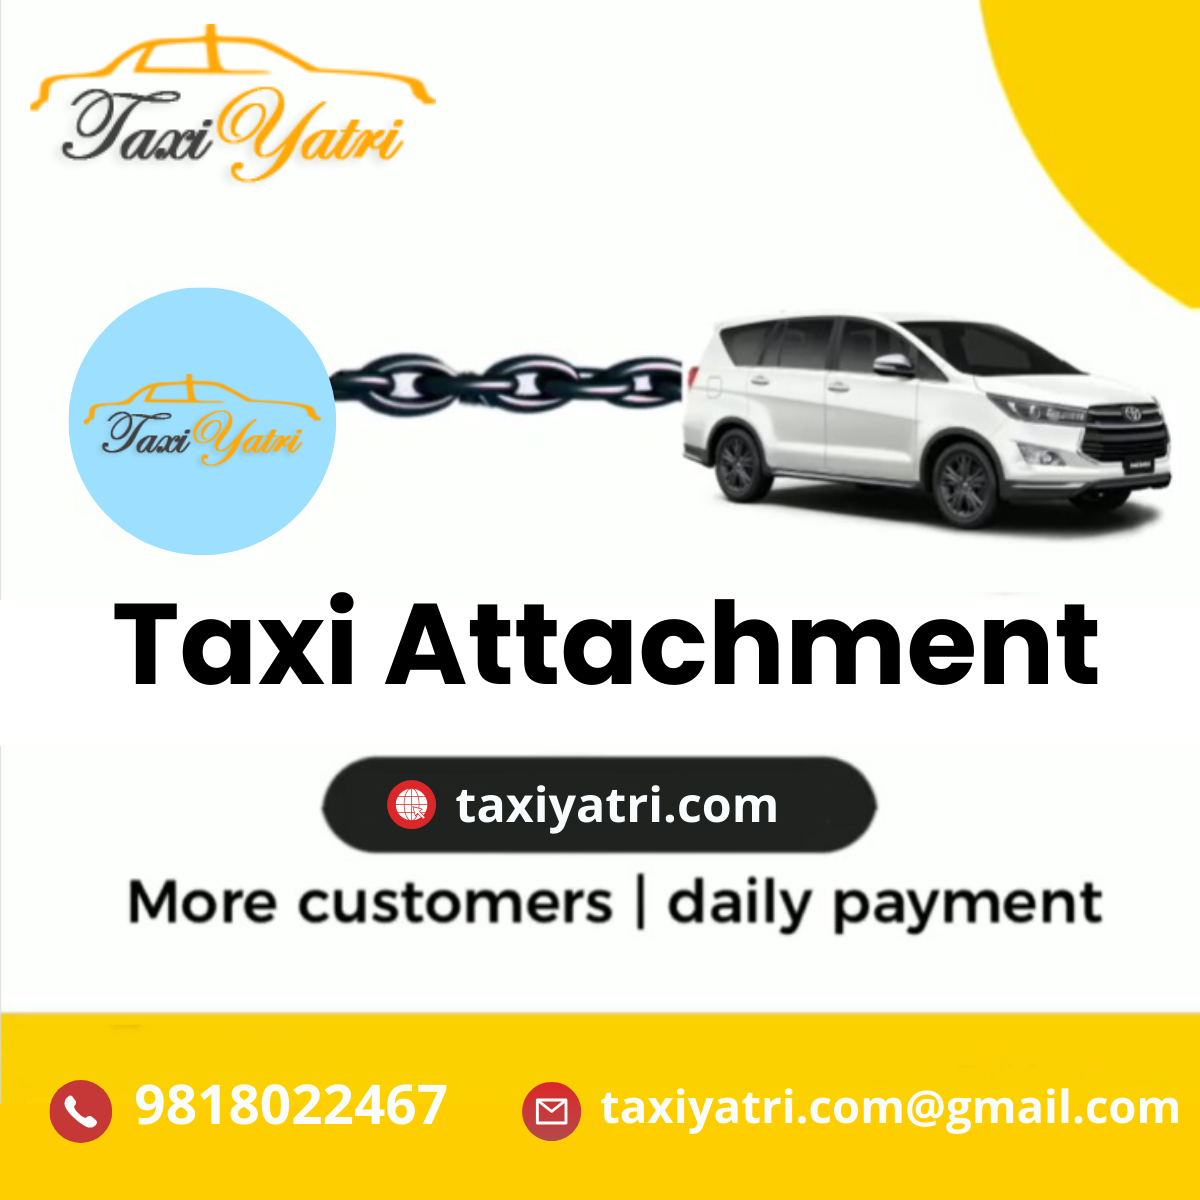 Travel Smarter, Not Harder: Taxi Attachments with TaxiYatri - Other Other